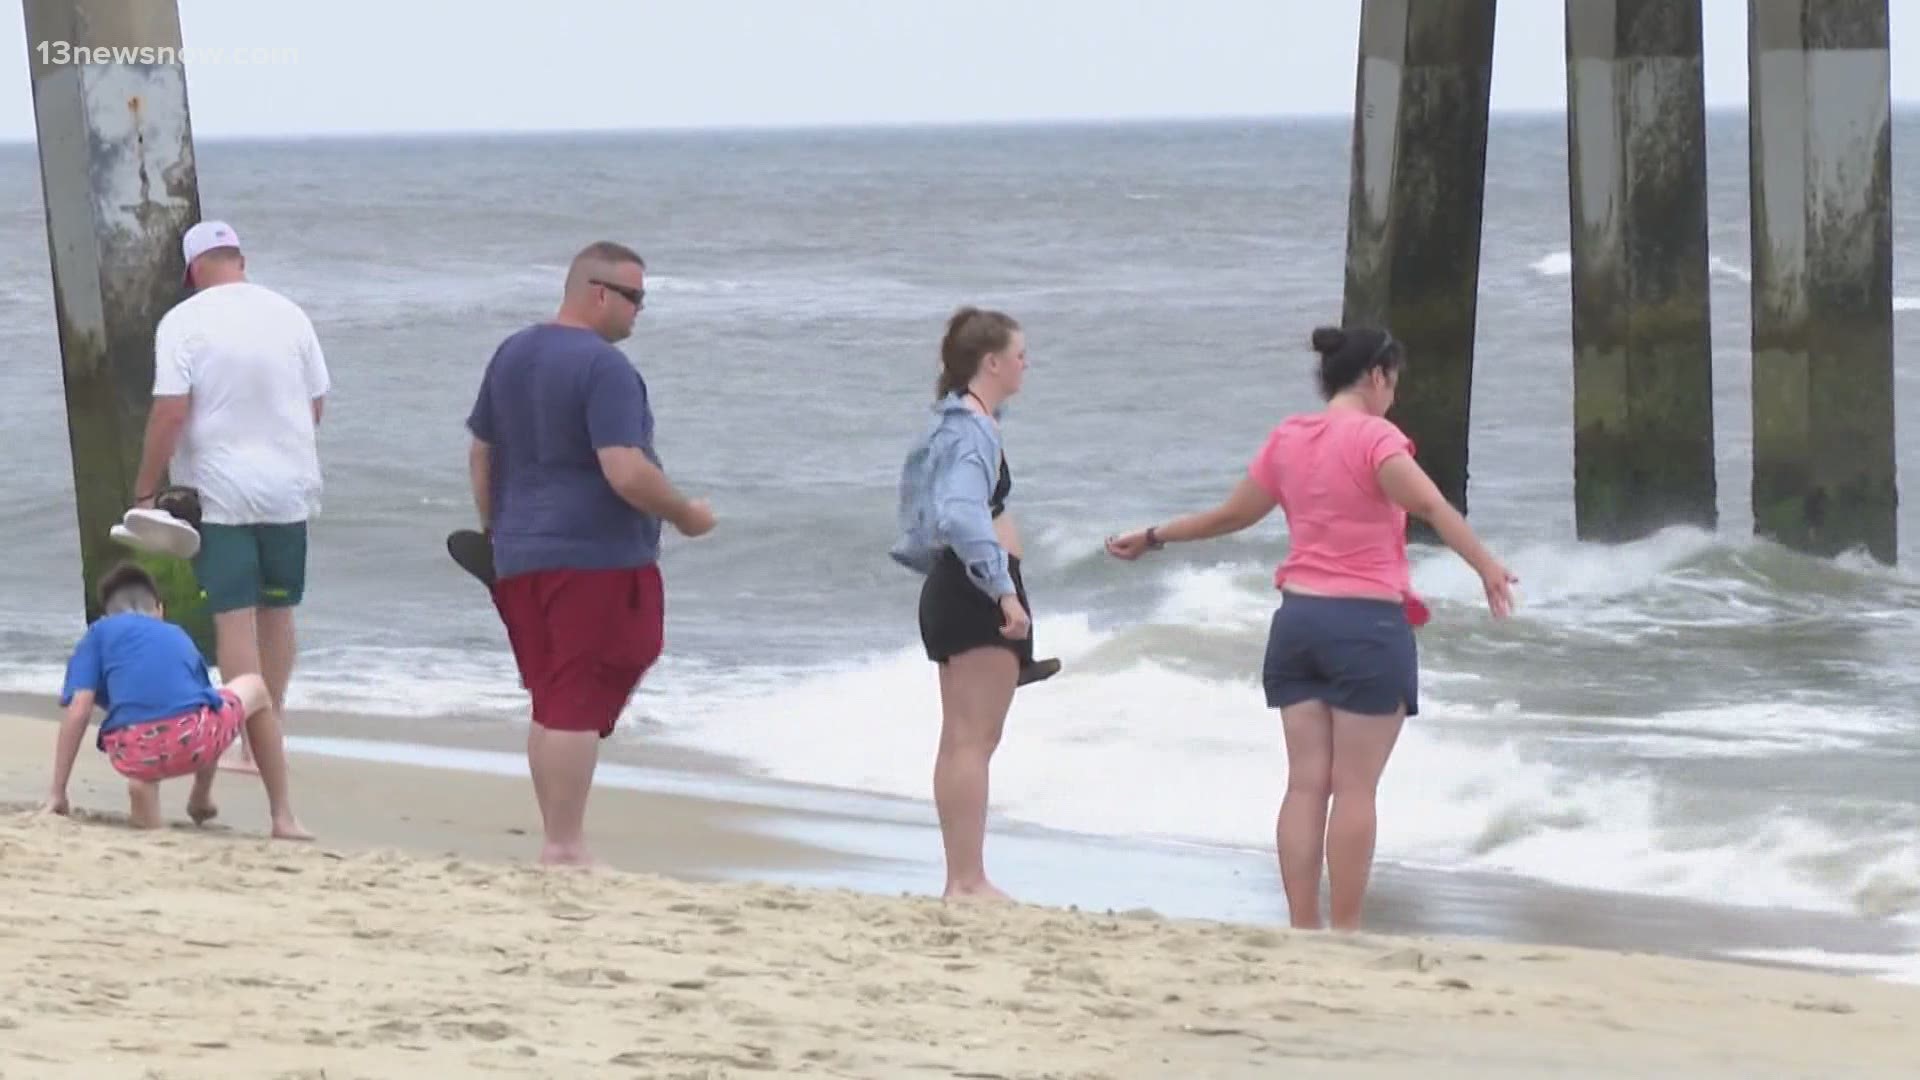 As Tropical Storm Elsa rolled through Nags Head, beachgoers soaked up an afternoon at the beach.